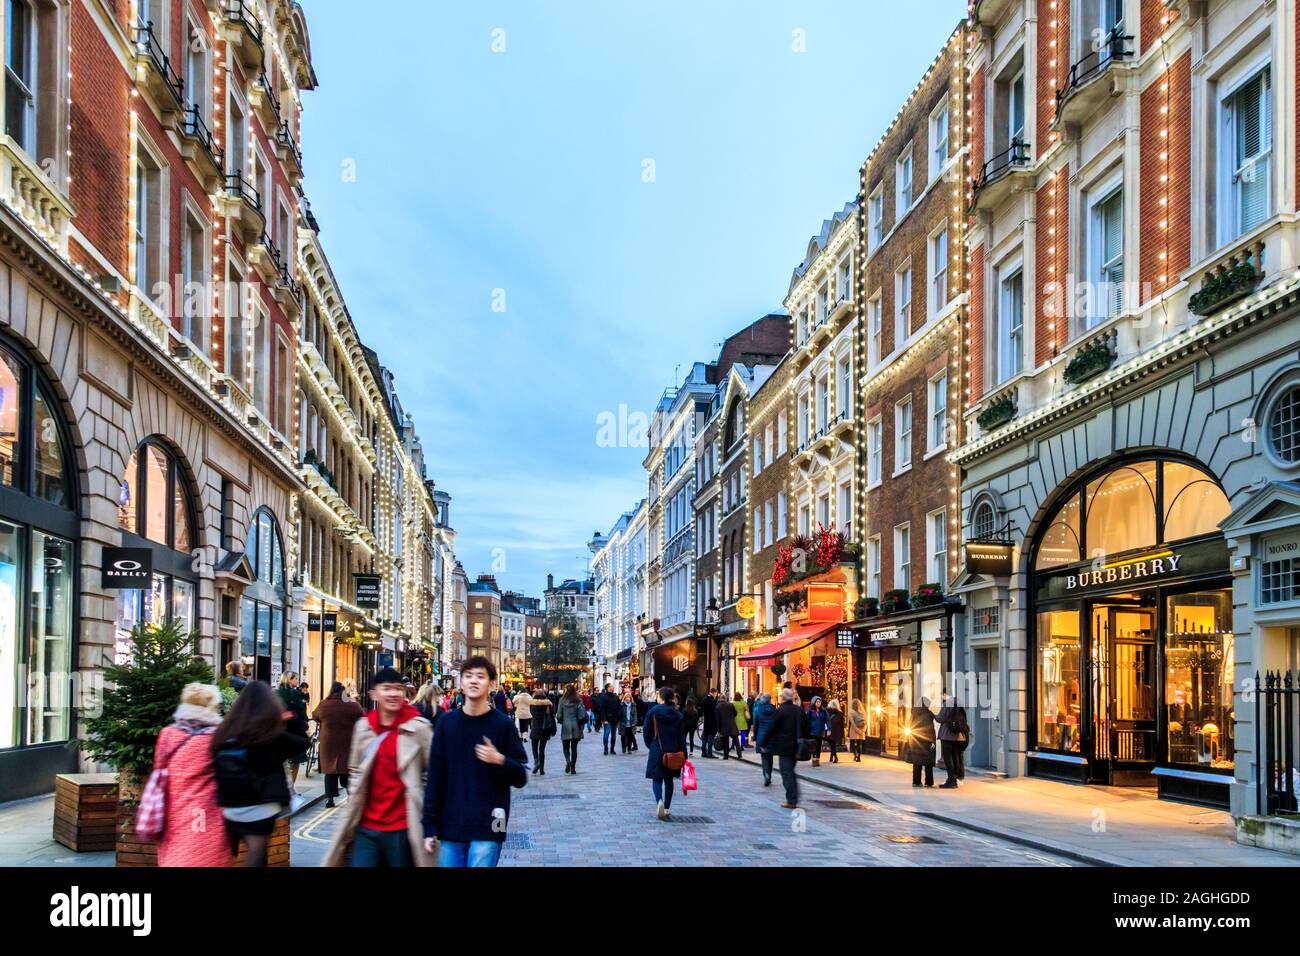 Shoppers and tourists in Long Acre, Covent Garden, London, UK Stock Photo